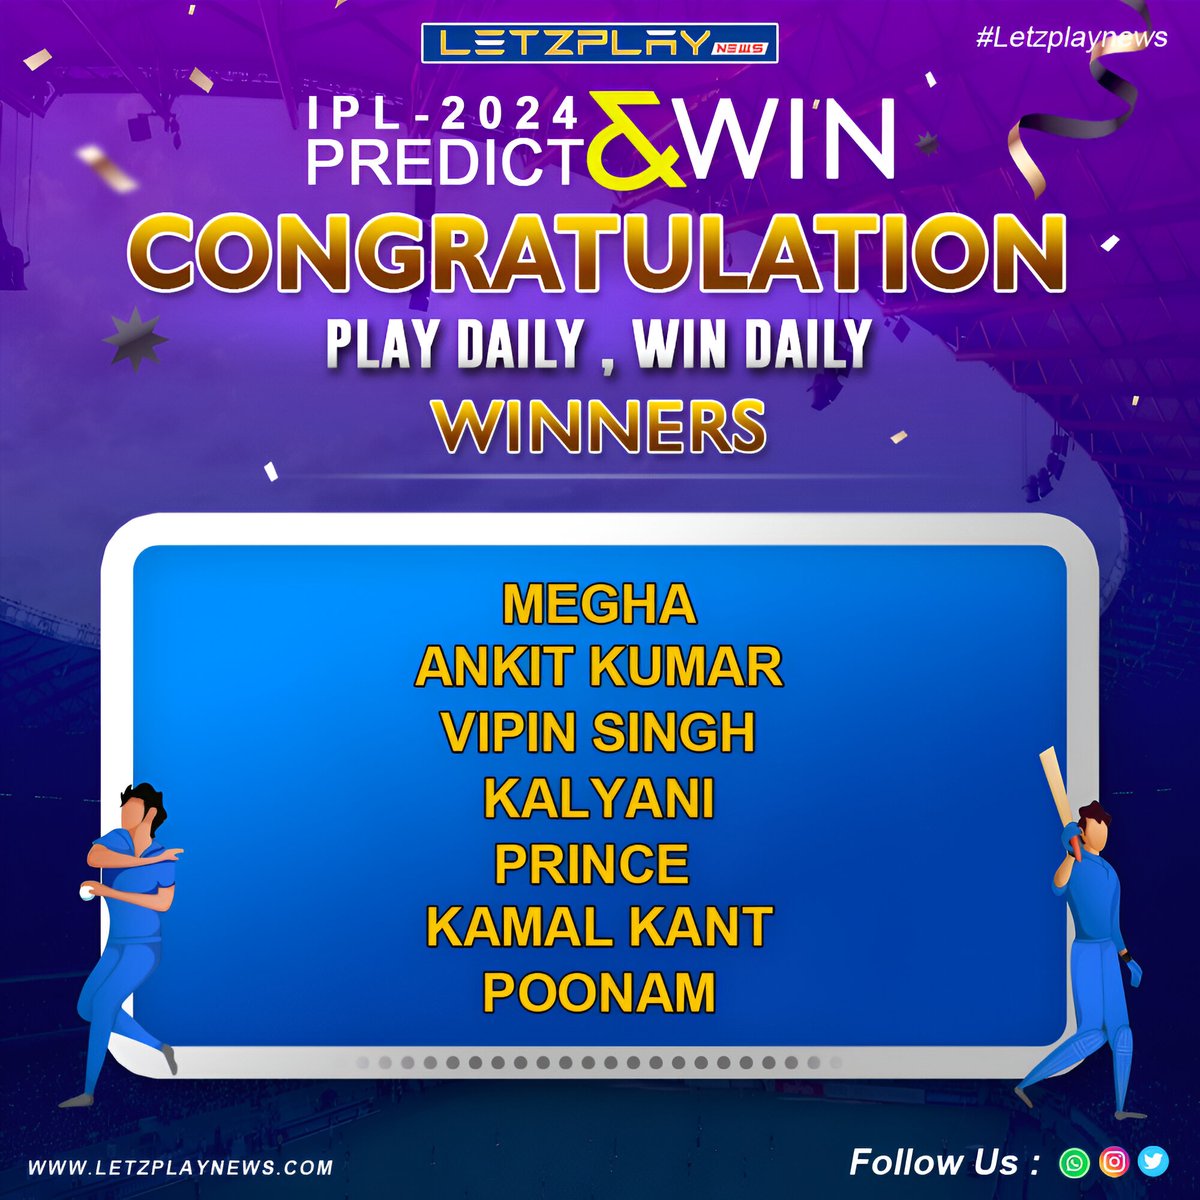 🎉 Get ready to applaud our champions! 🏆 Our Play Daily Win Daily IPL 2024 competition, fueled by Letzplay.in, has crowned its winners!

Congratulations to our astute predictors! 🥳

#LetzplayNews #IPL2024 #WinnerAnnouncement #LetzplayIn #CricketFever 🏆